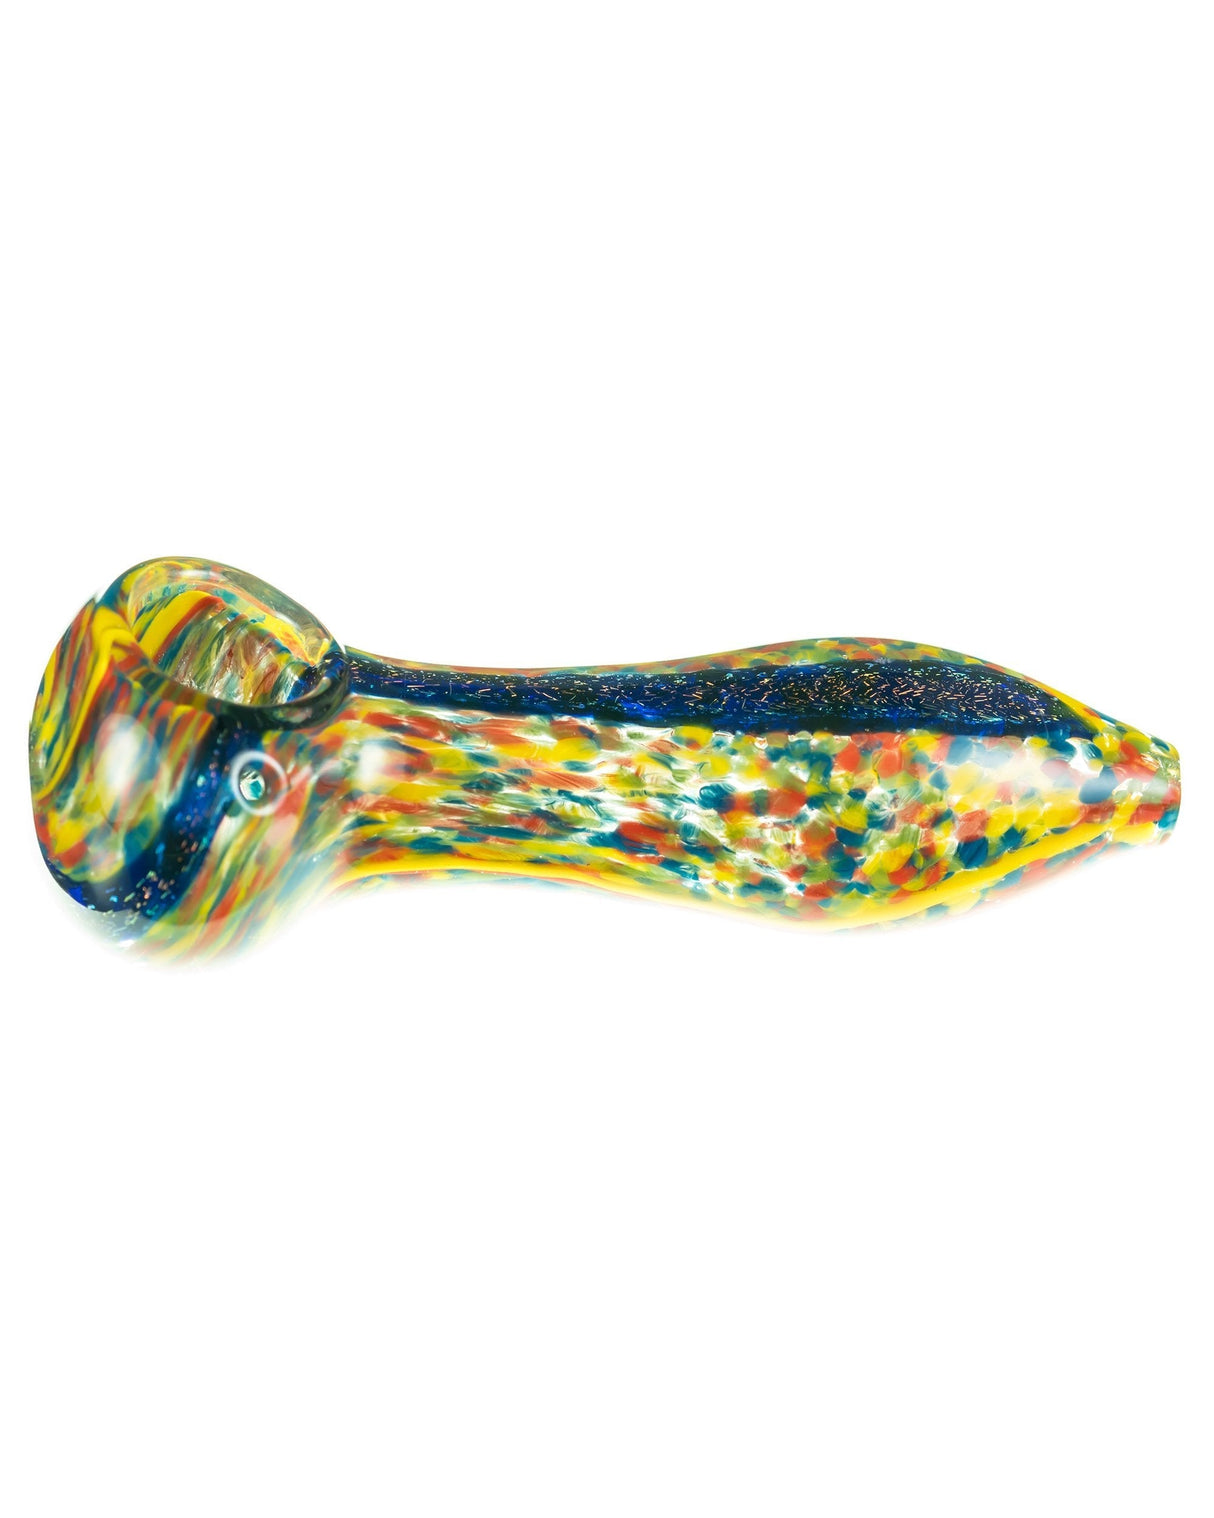 DankGeek Dichro Stripe Fritted Hand Pipe, 4.5" Heavy Wall Glass, Portable Spoon Design for Dry Herbs